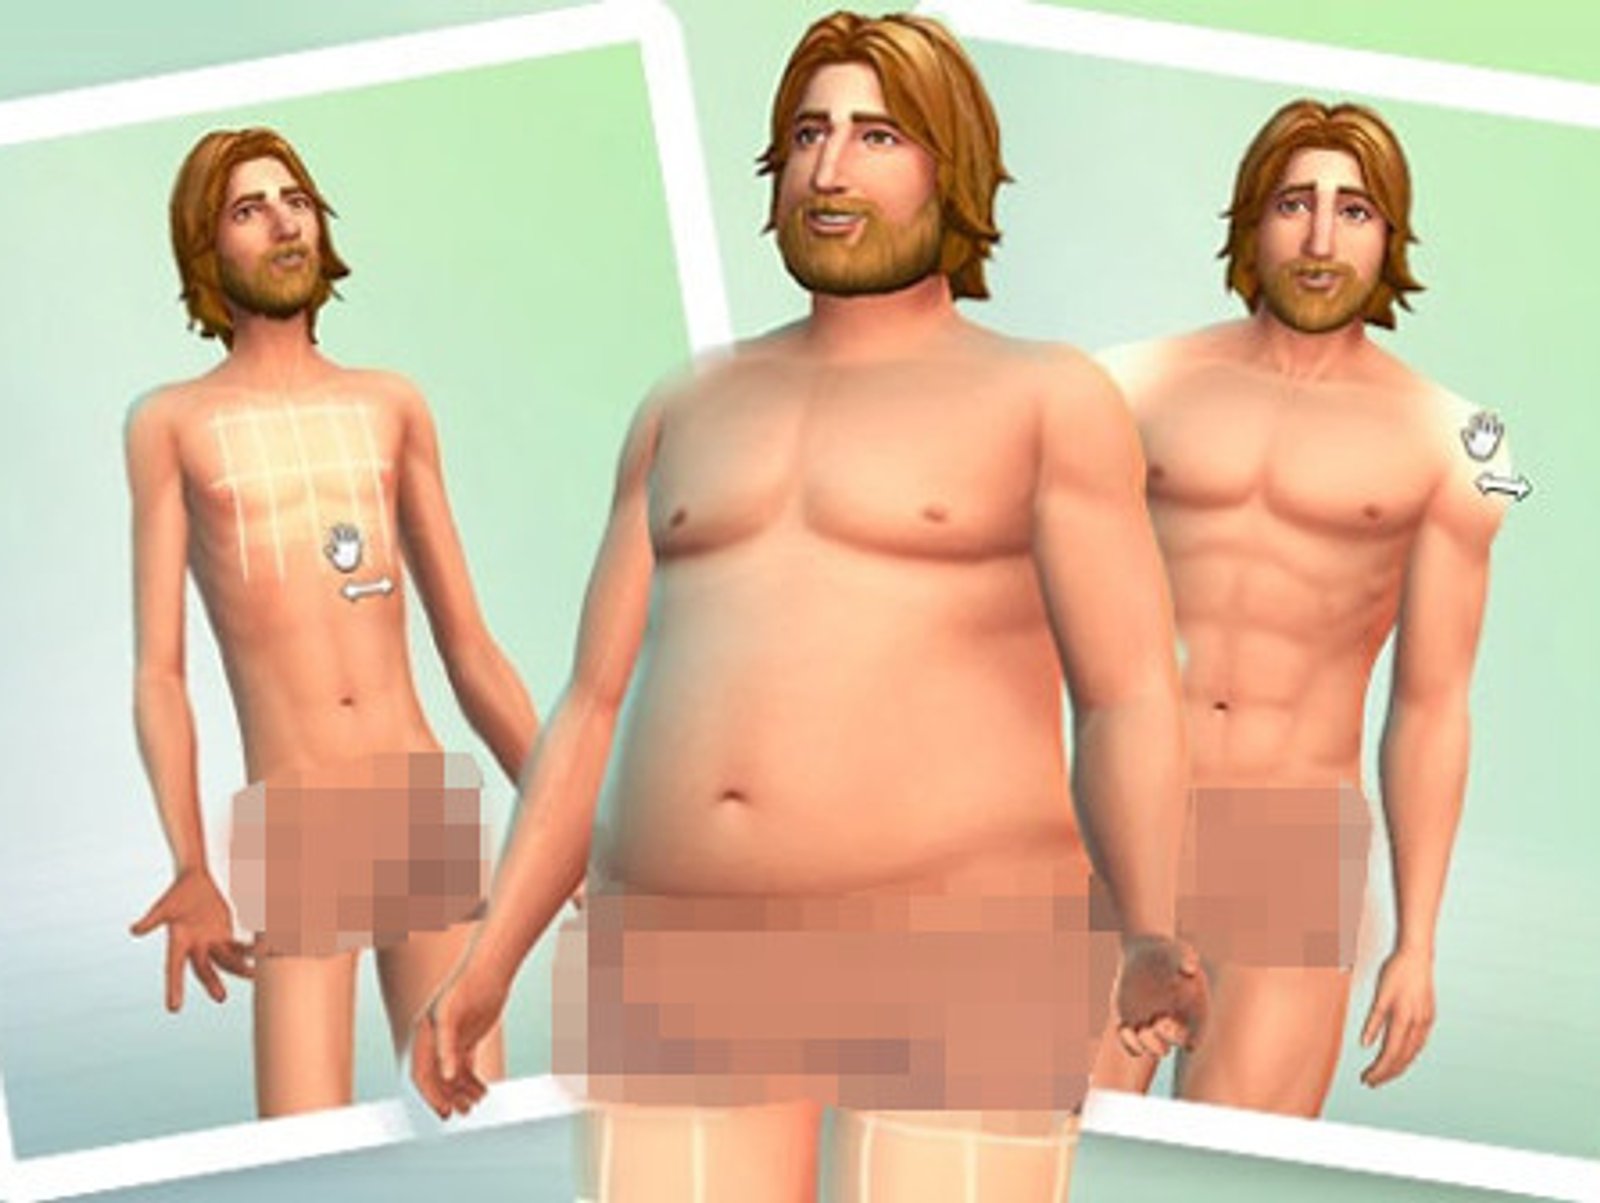 andy watkins recommends The Sims 4 Nude Patch